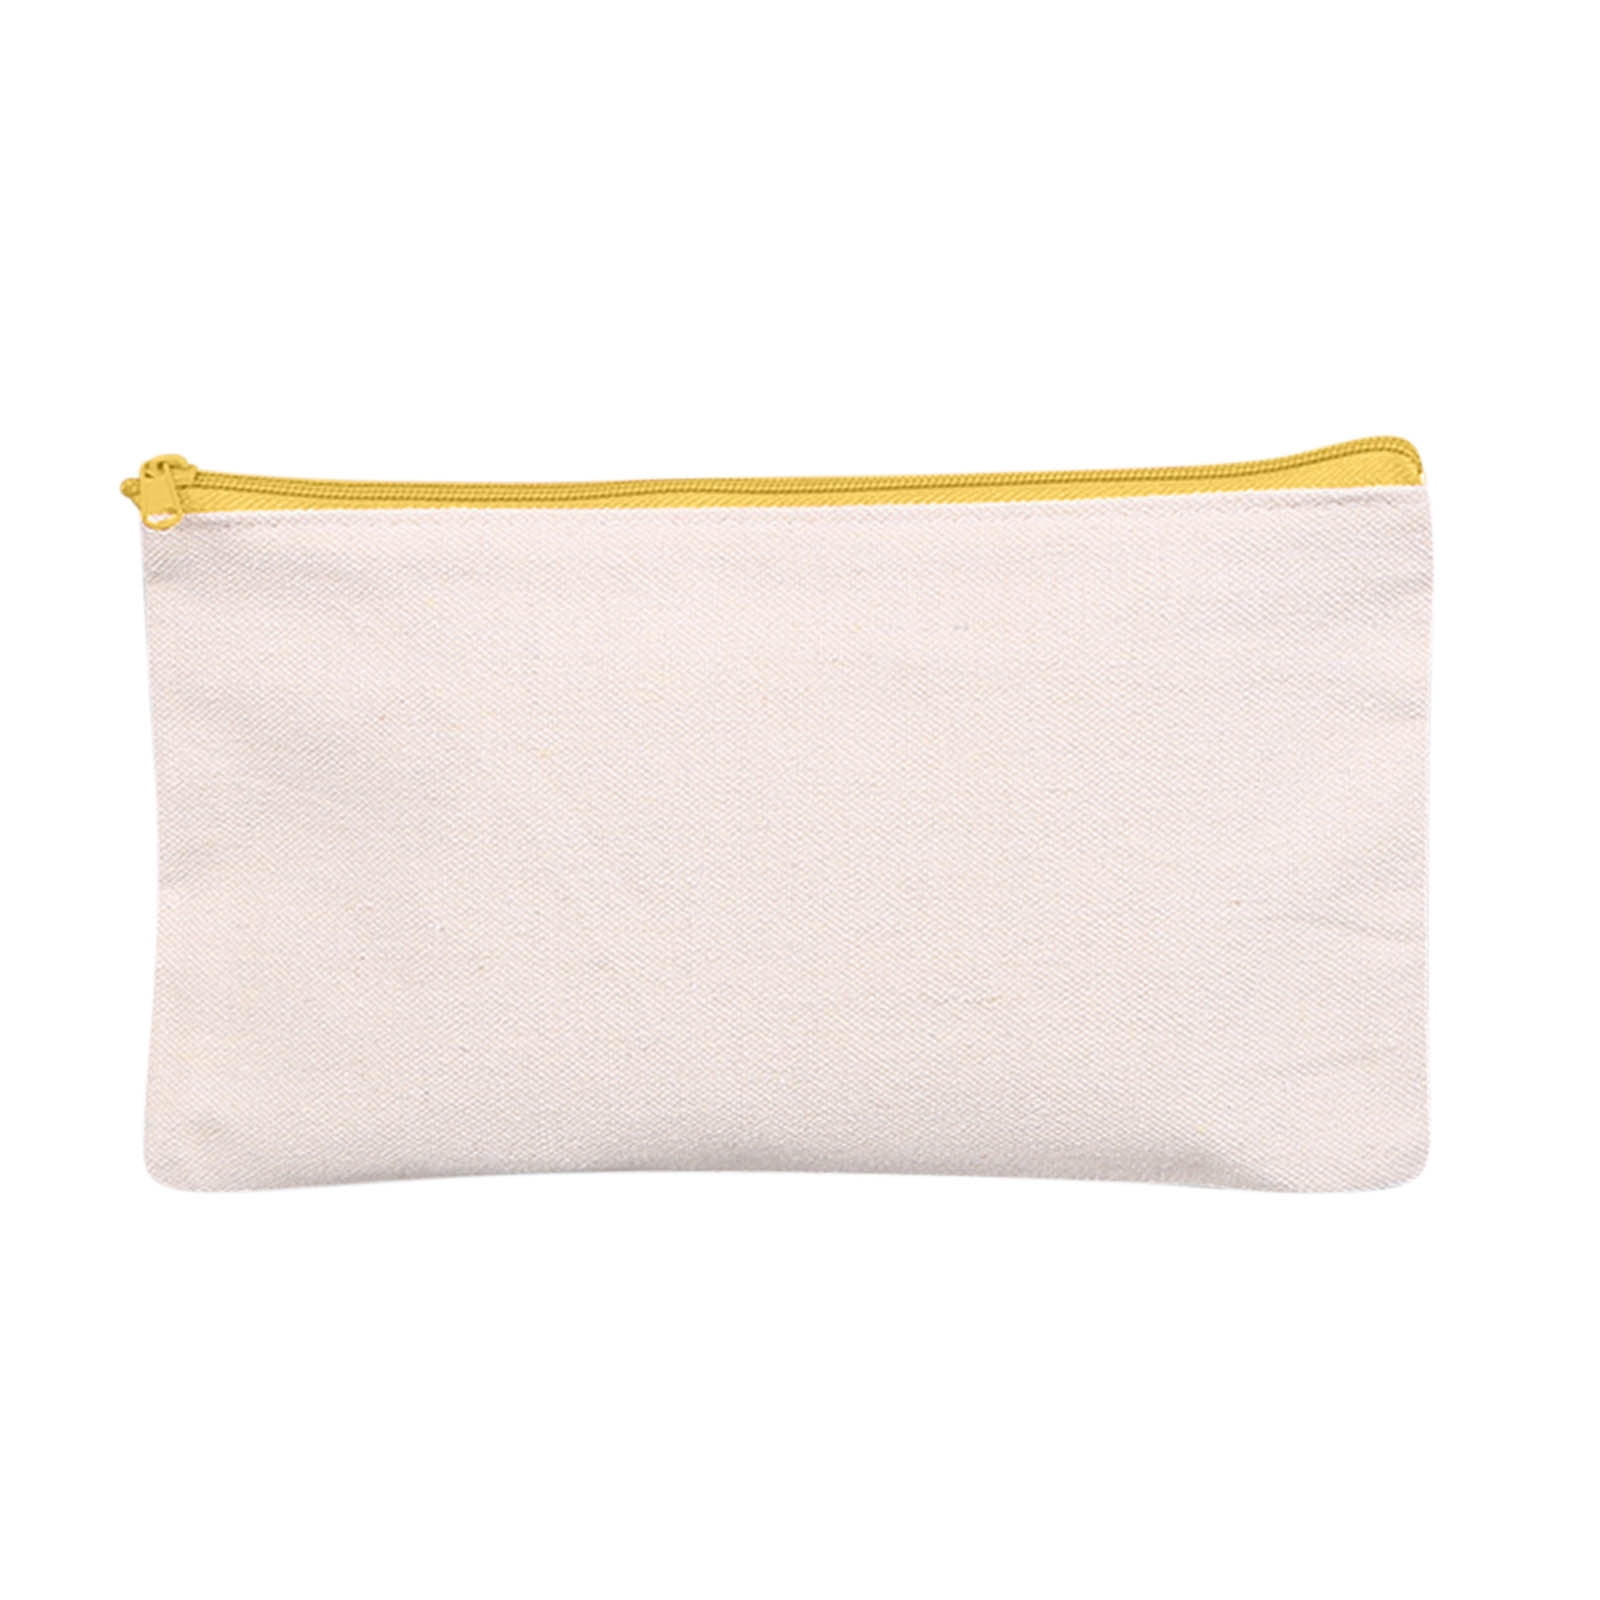 PRINxy Pen Pencil Case Blank Canvas Zipper Pouch For DIY CraftCanvas Makeup  Bags With Canvas Cosmetic Bag Multi-Purpose Travel Bags White